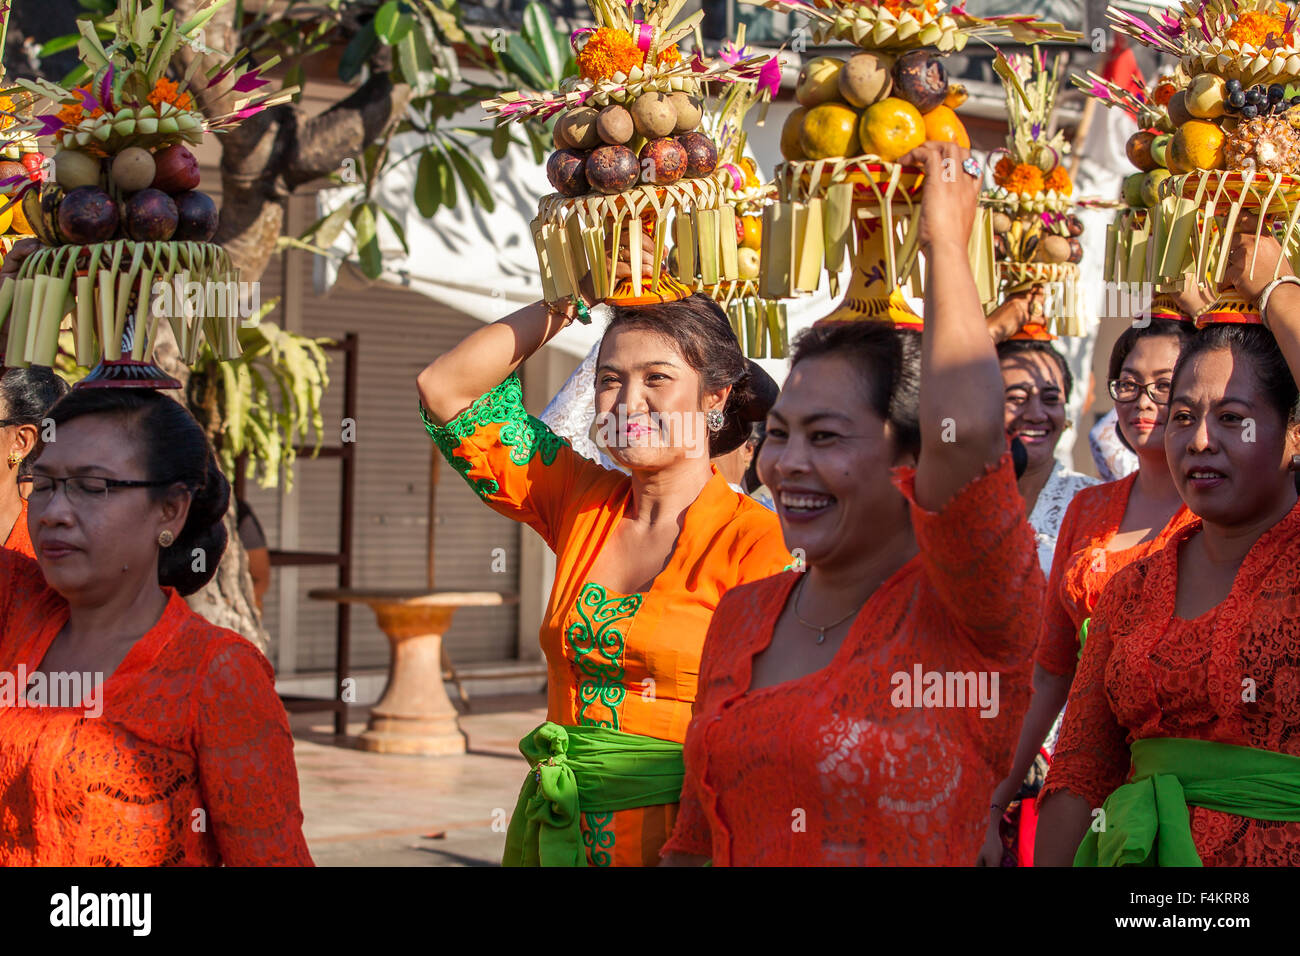 Balinese villagers participating in Sanur Village Festival's street parade Stock Photo